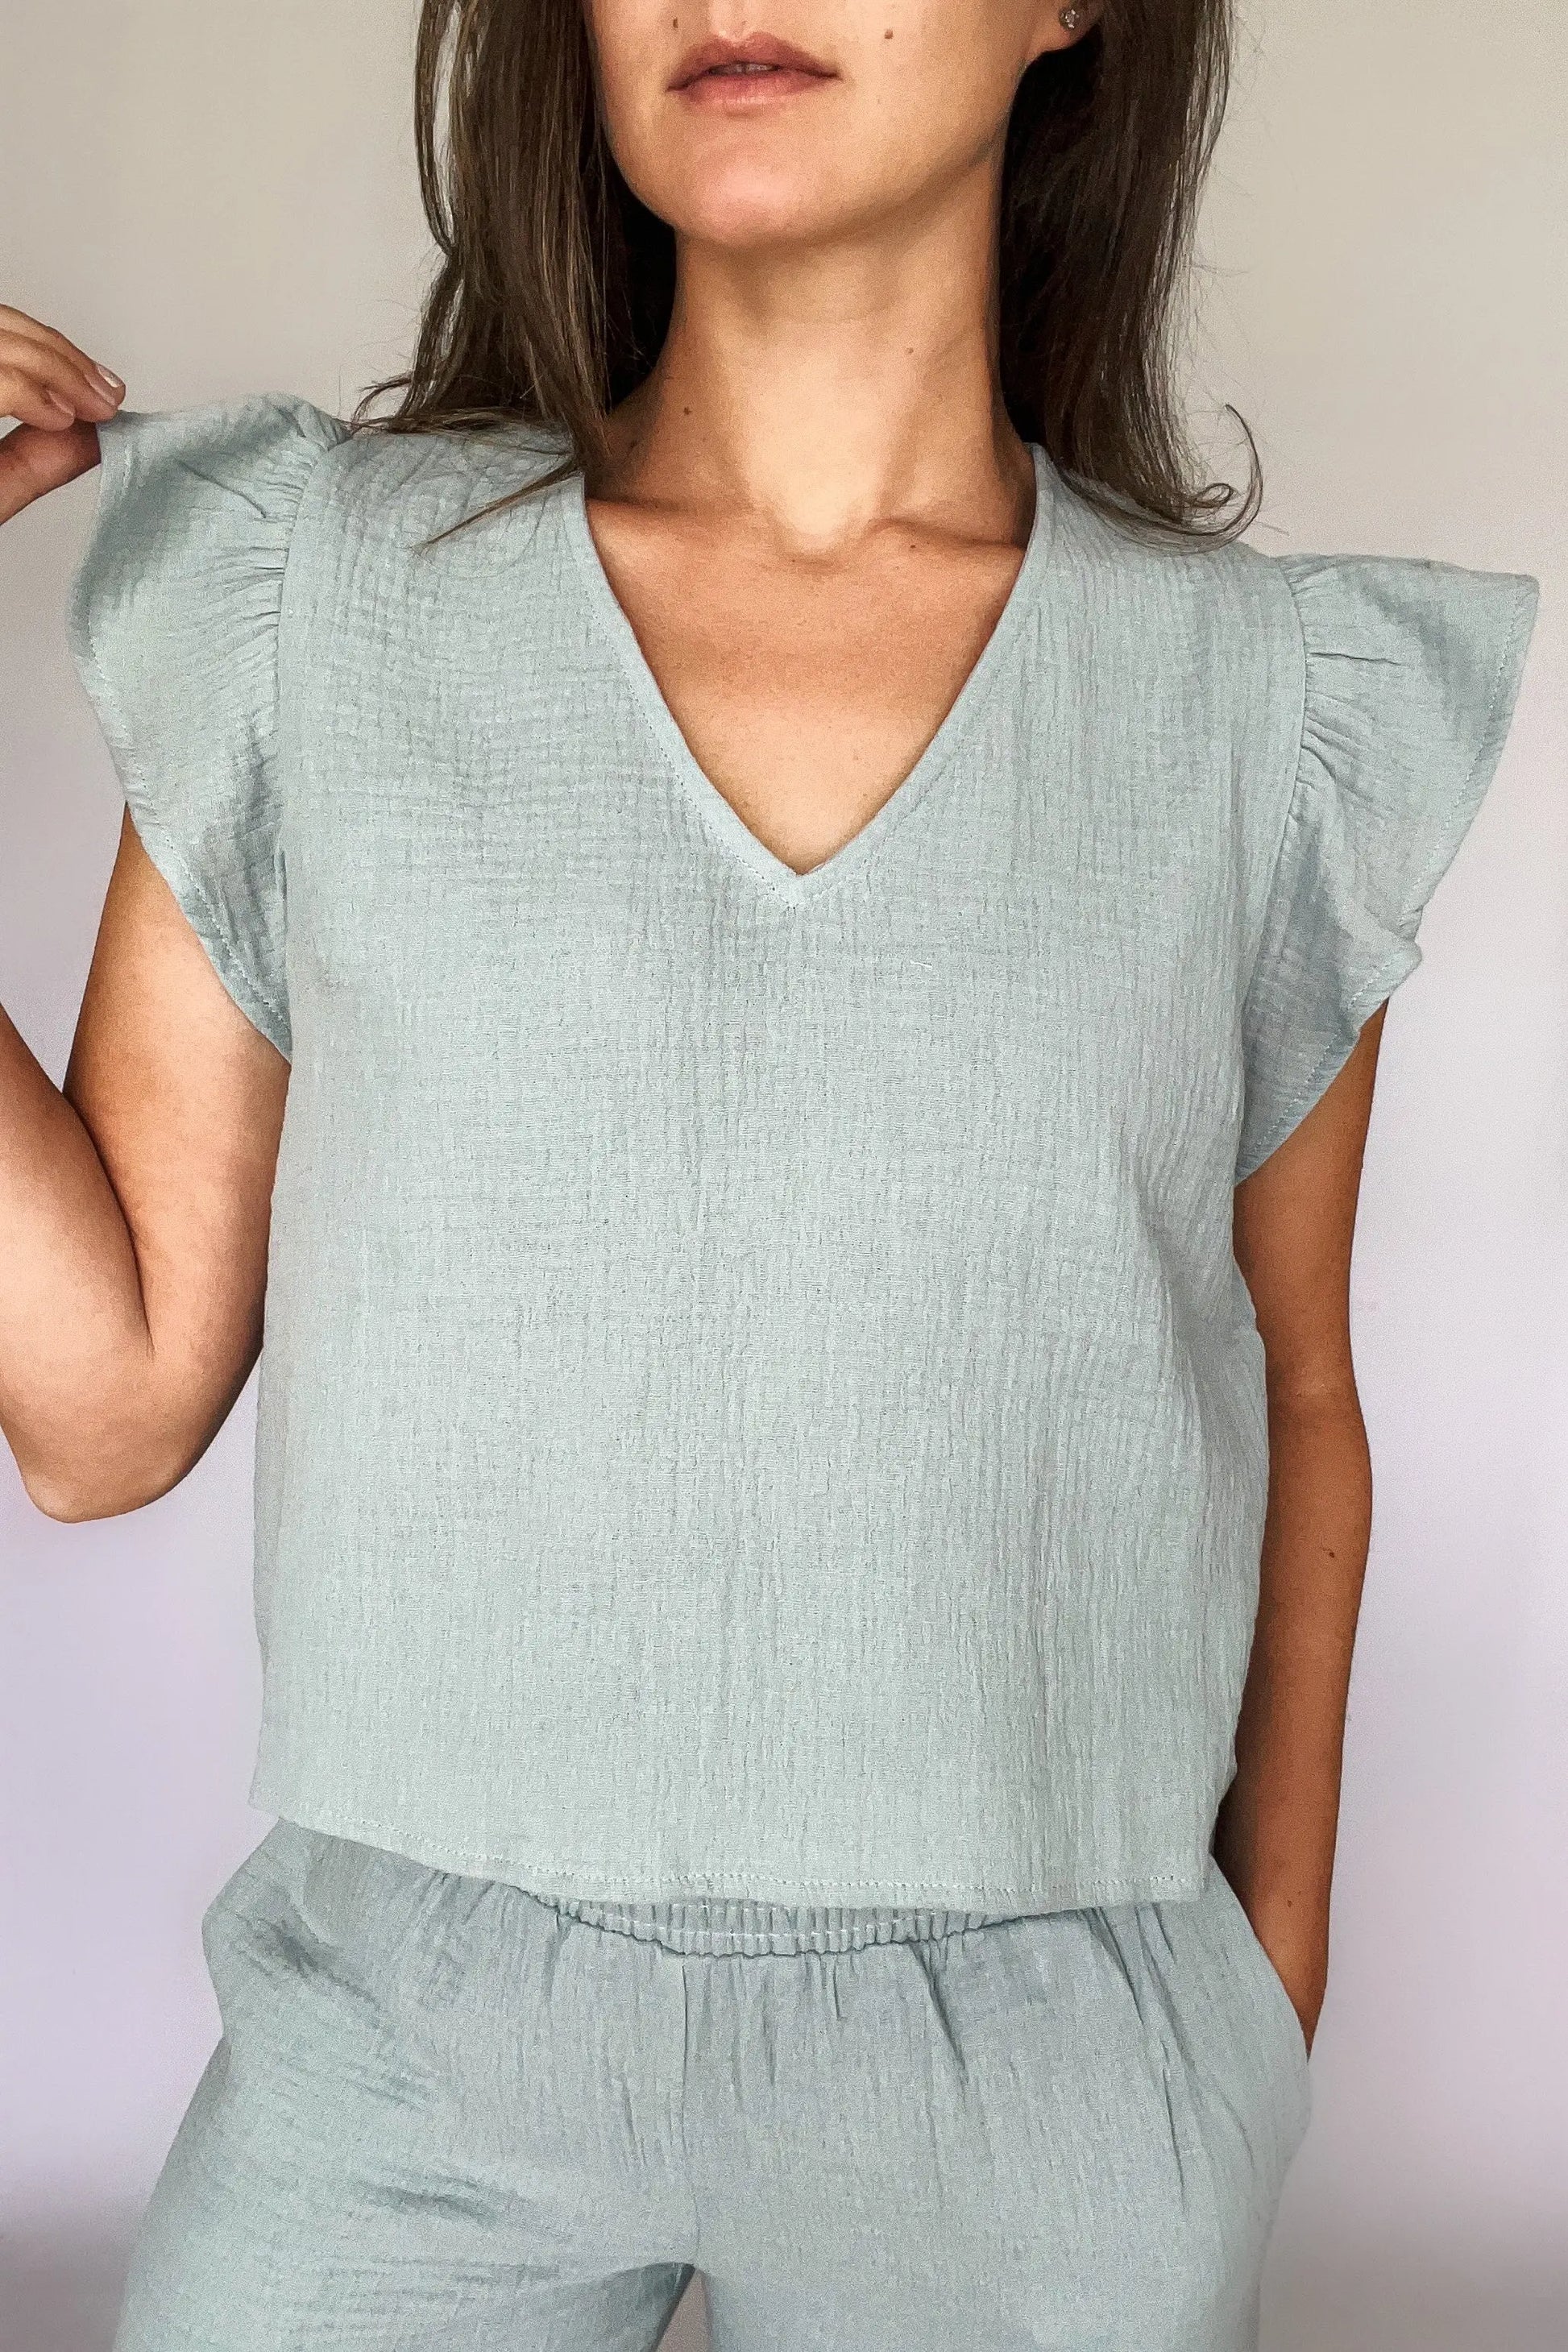 A woman modeling a sea blue cotton gauze ruffled sleeve top with matching pants